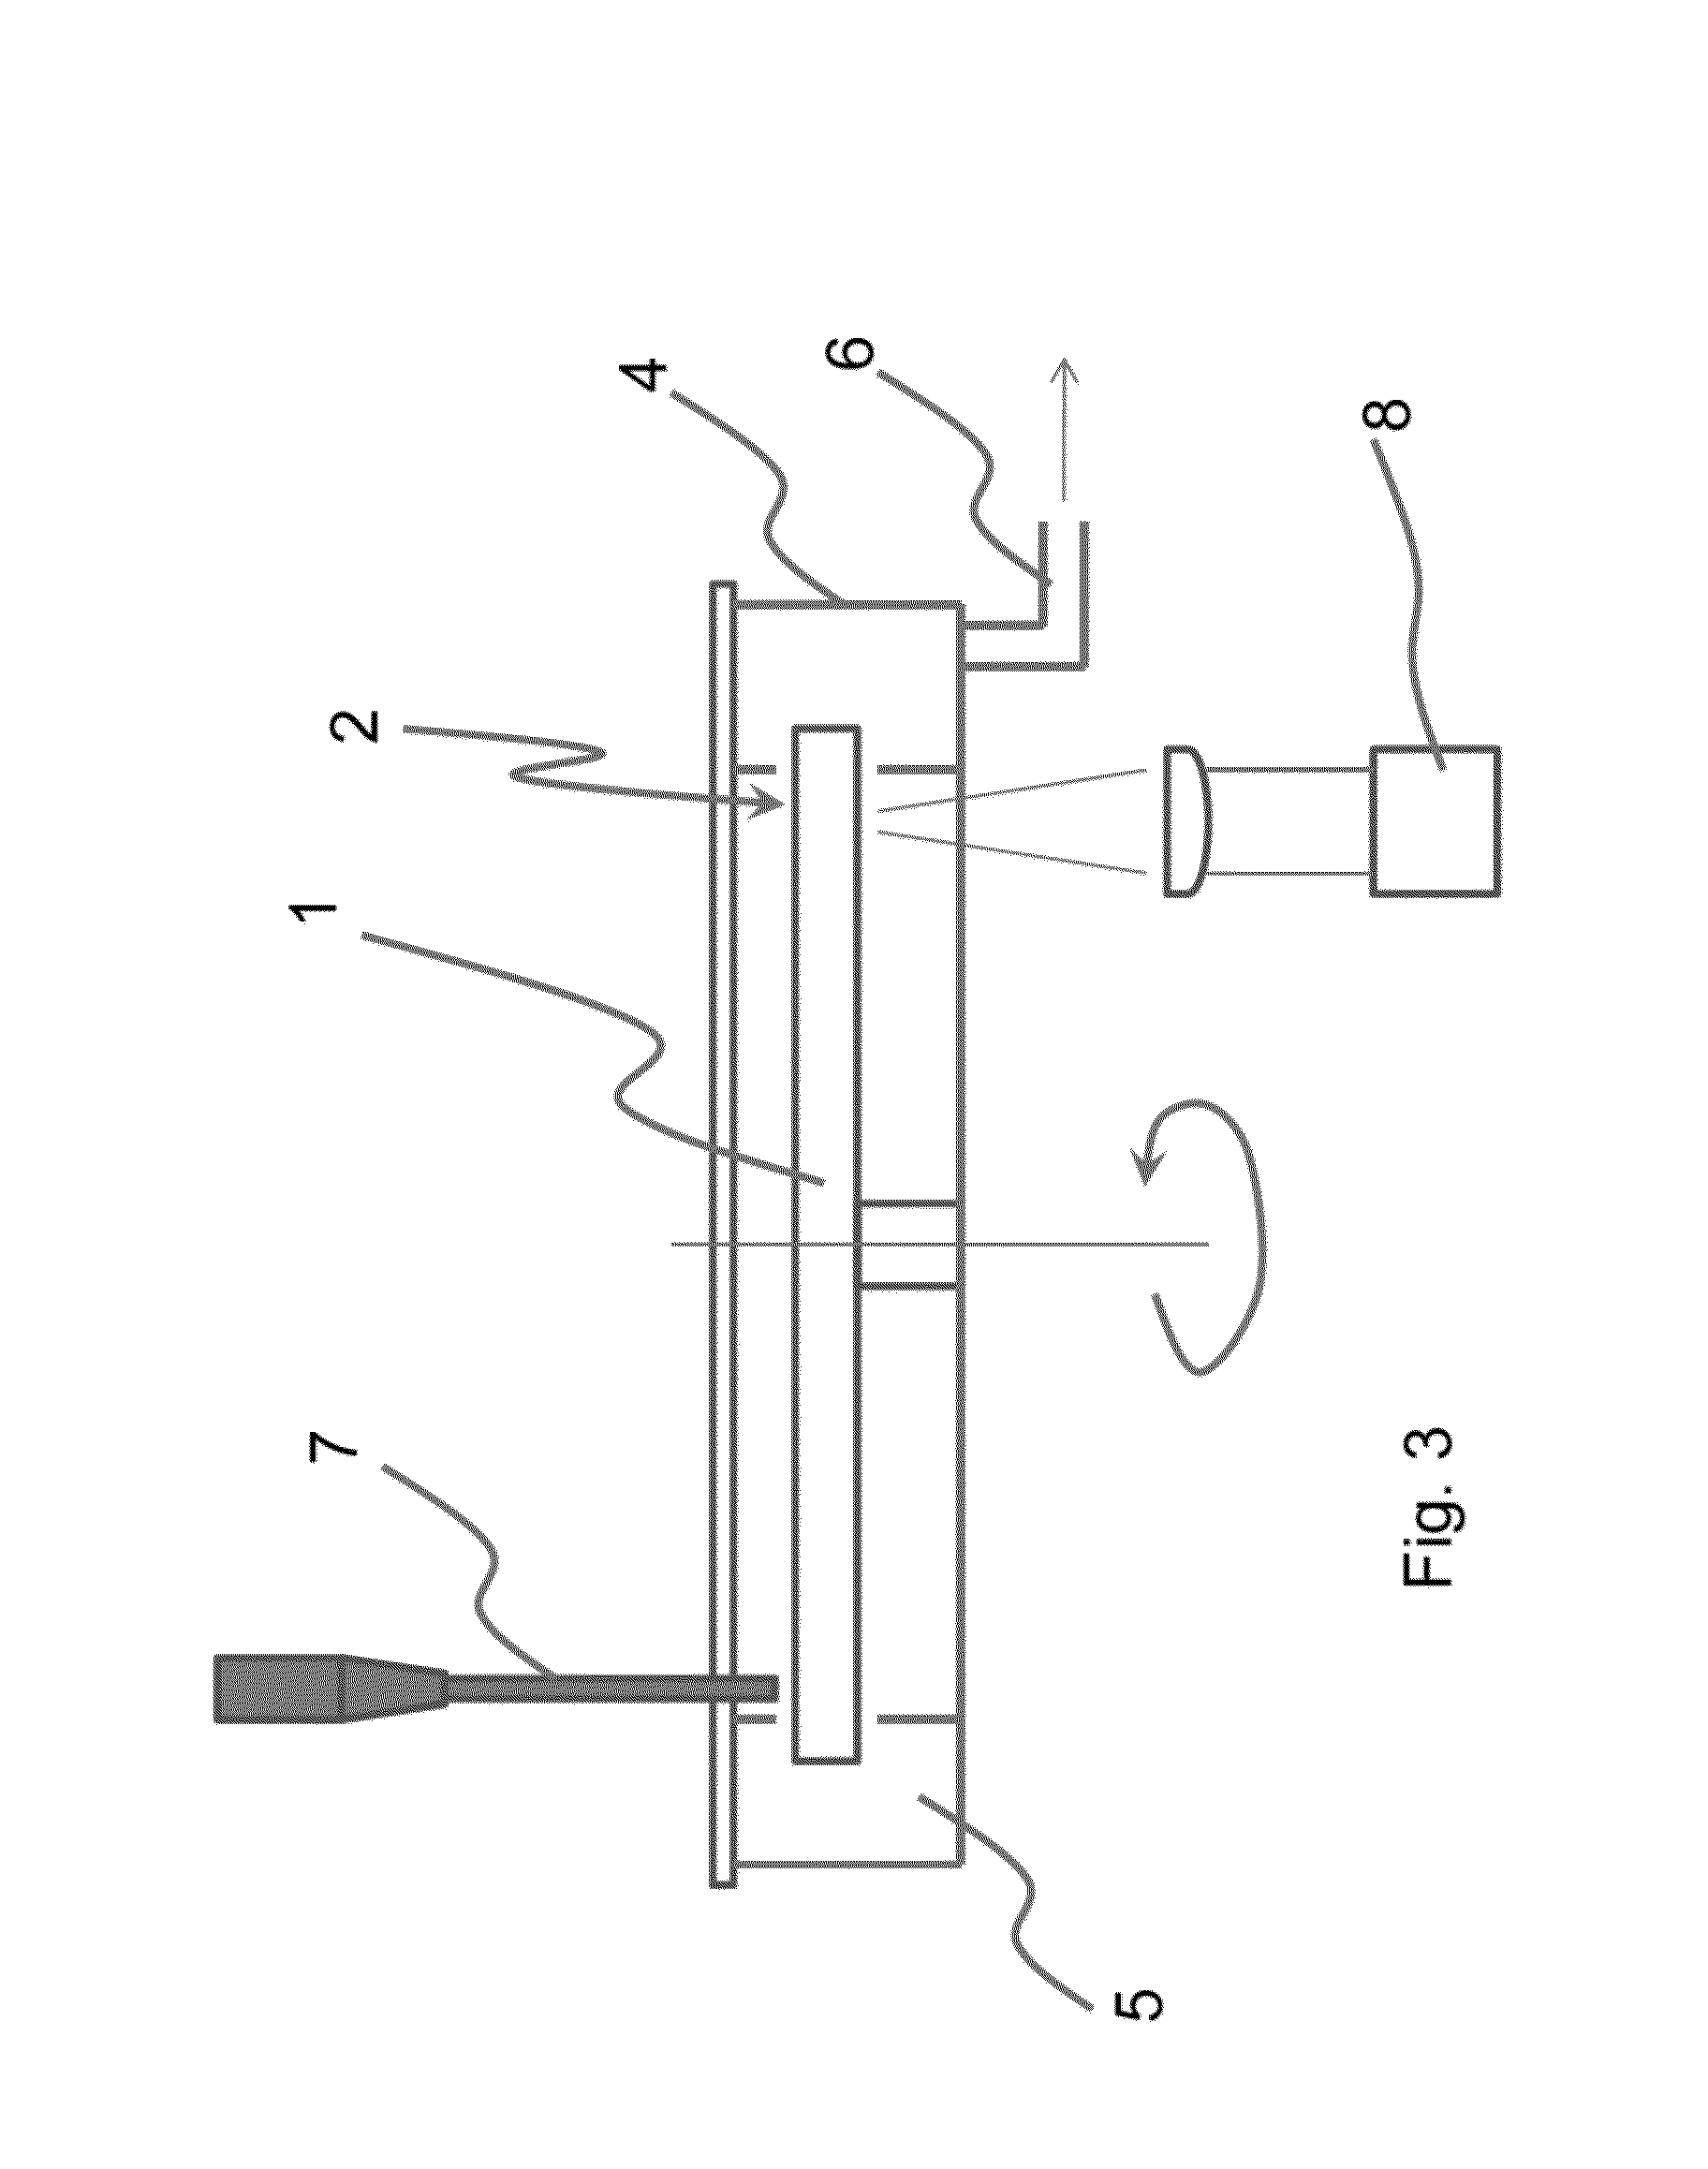 Method and apparatus for conducting an assay